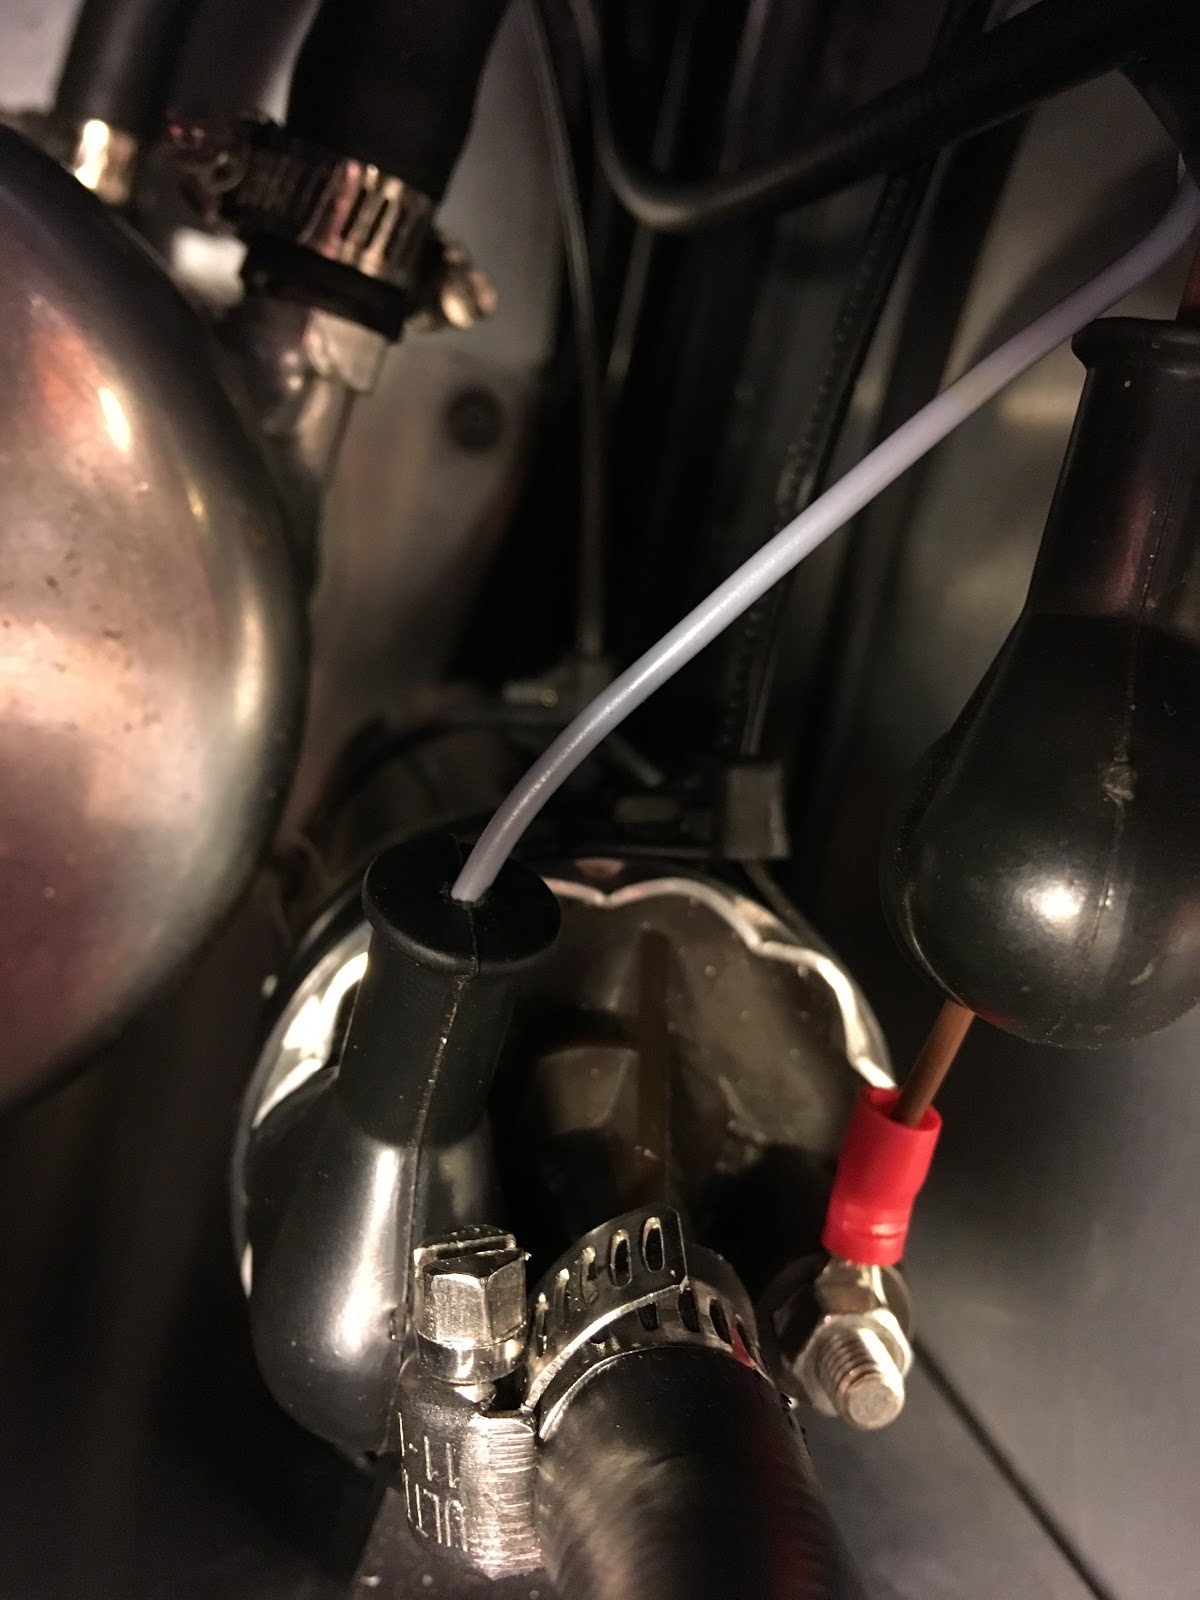 Laneys GBS Zero blog: Fuel pump and starter motor wired in